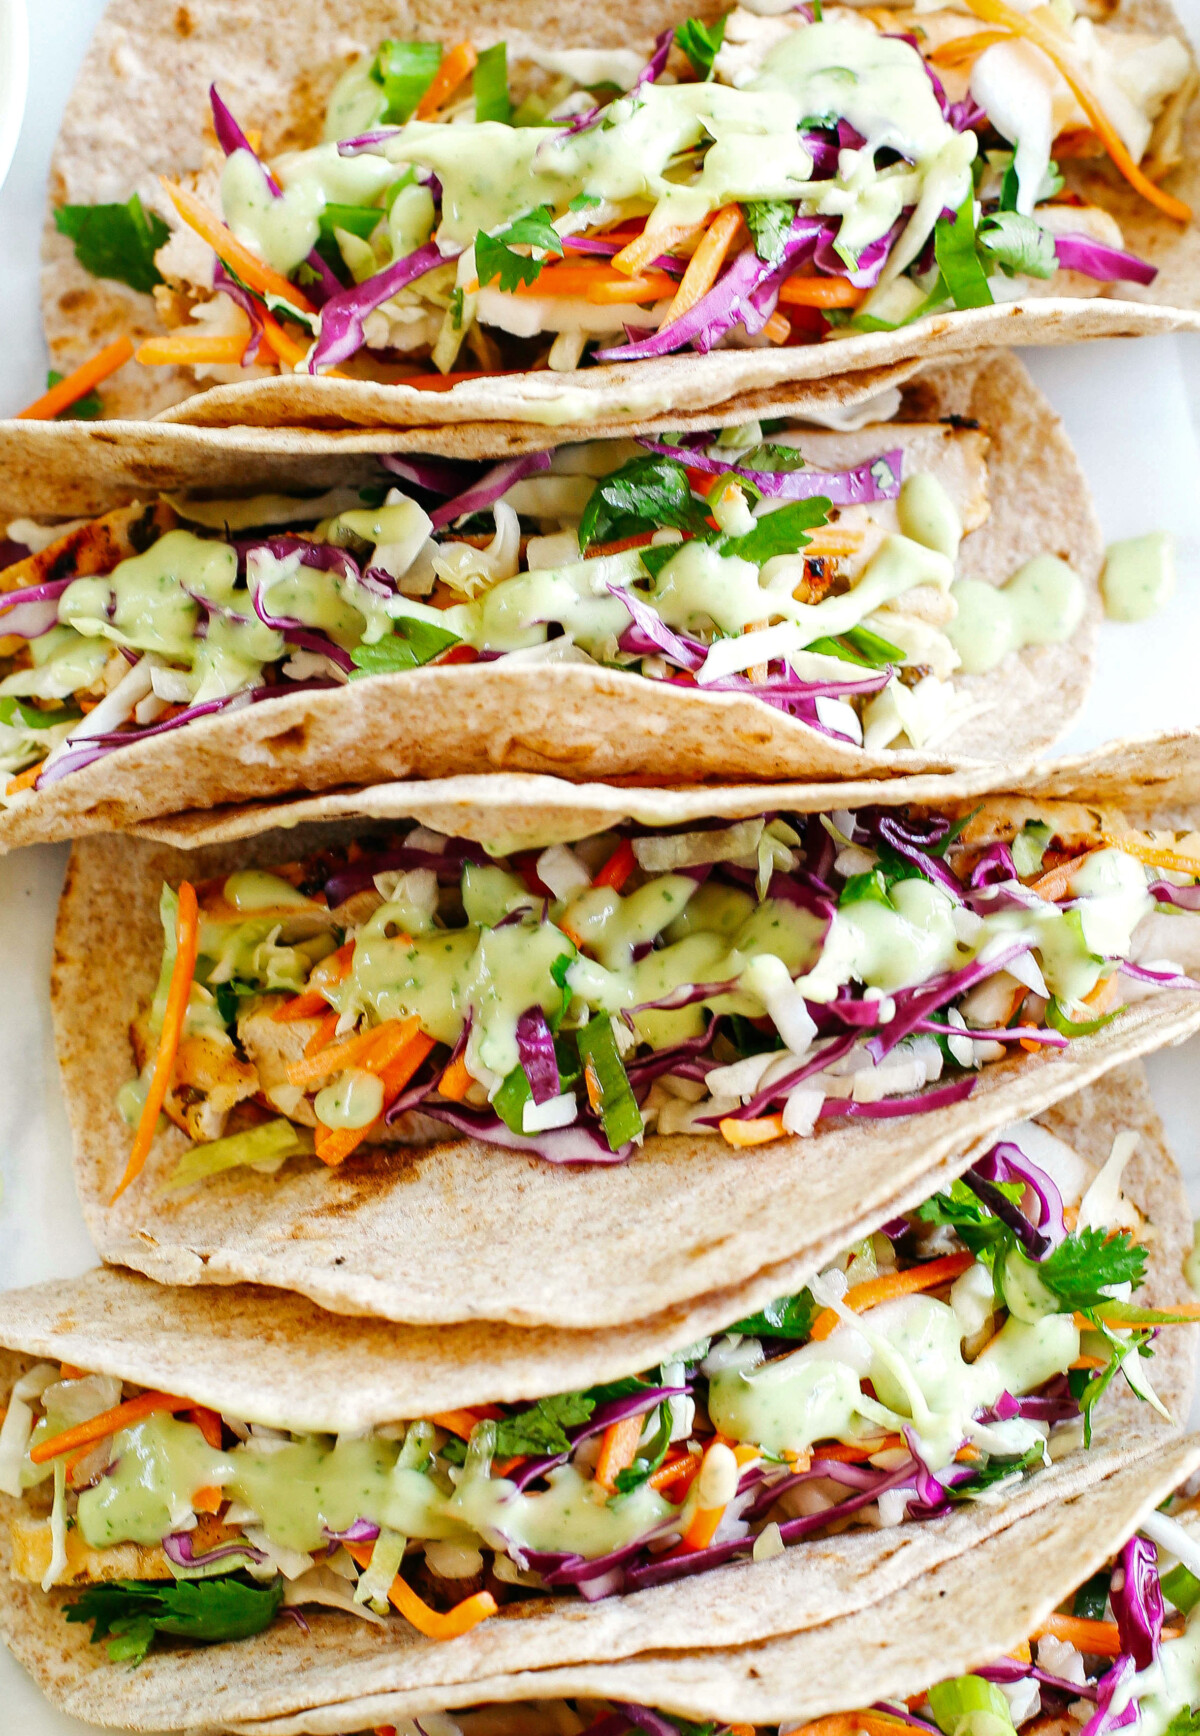 Easy and delicious Cilantro Lime Chicken Tacos topped with tangy coleslaw and homemade avocado crema make the perfect EASY summer recipe!  Full of fresh flavors and healthy ingredients!